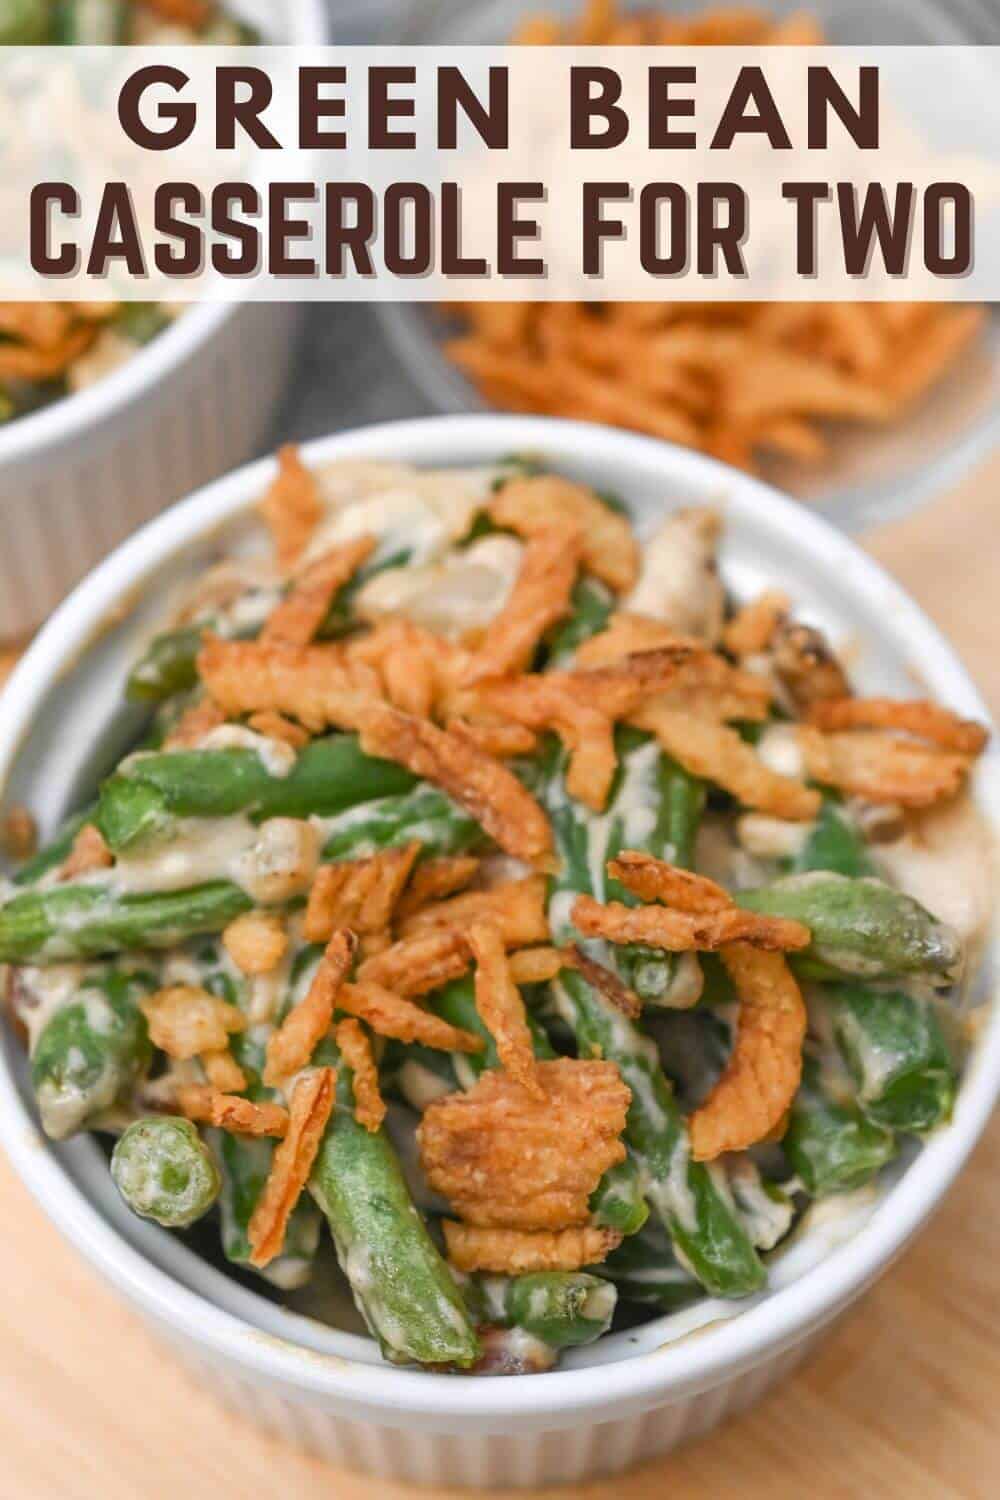 Green bean casserole for two.